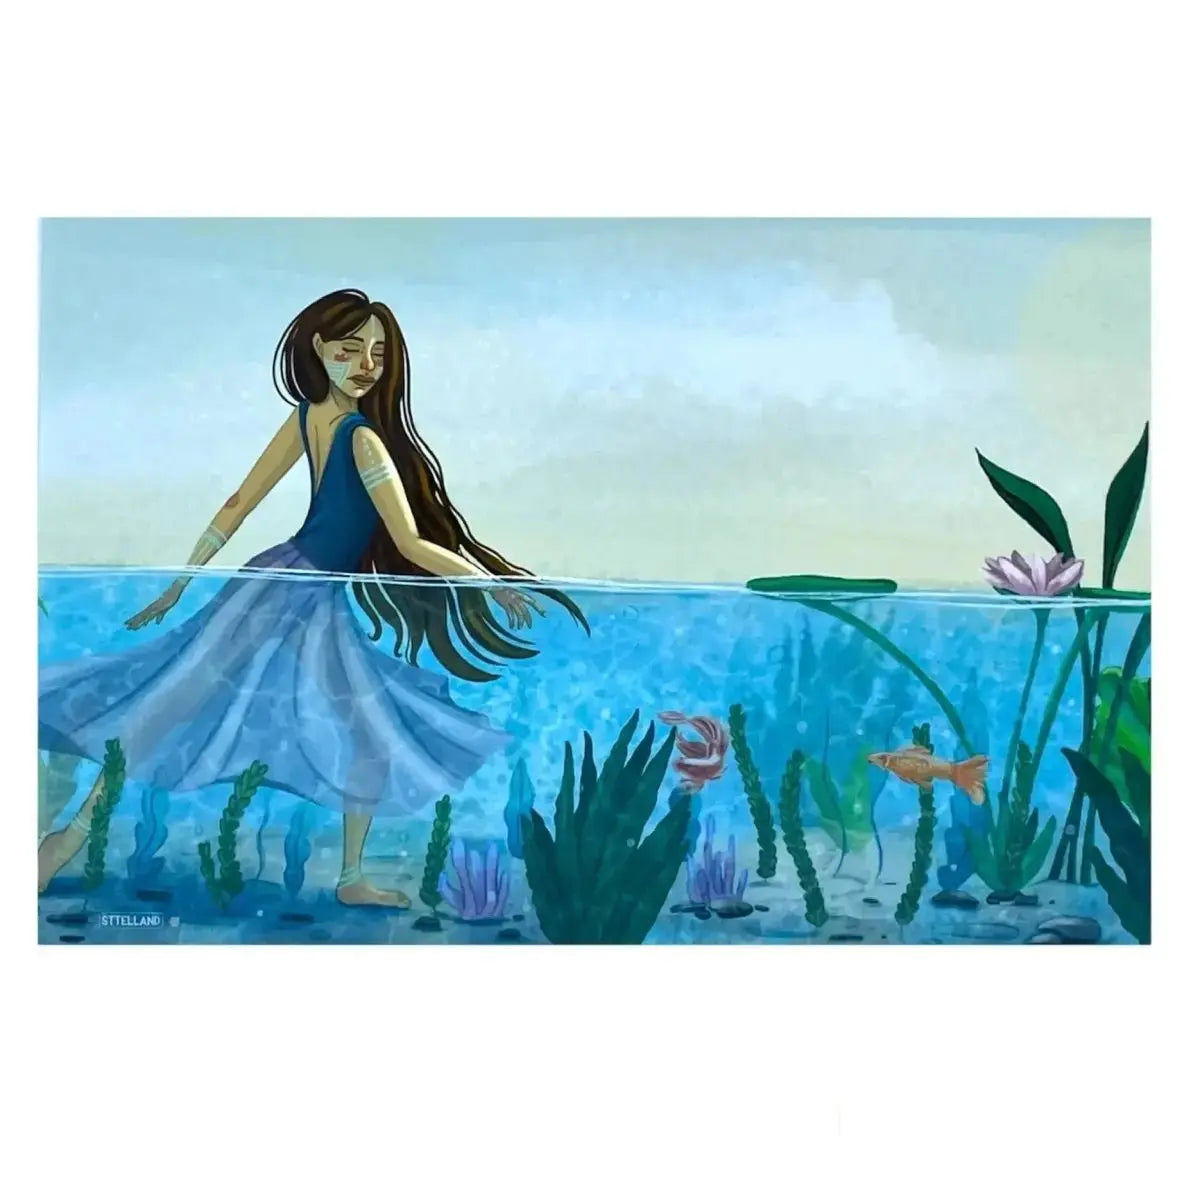 Girl in the Sea - Wall Art Poster Print Sttelland Boutique